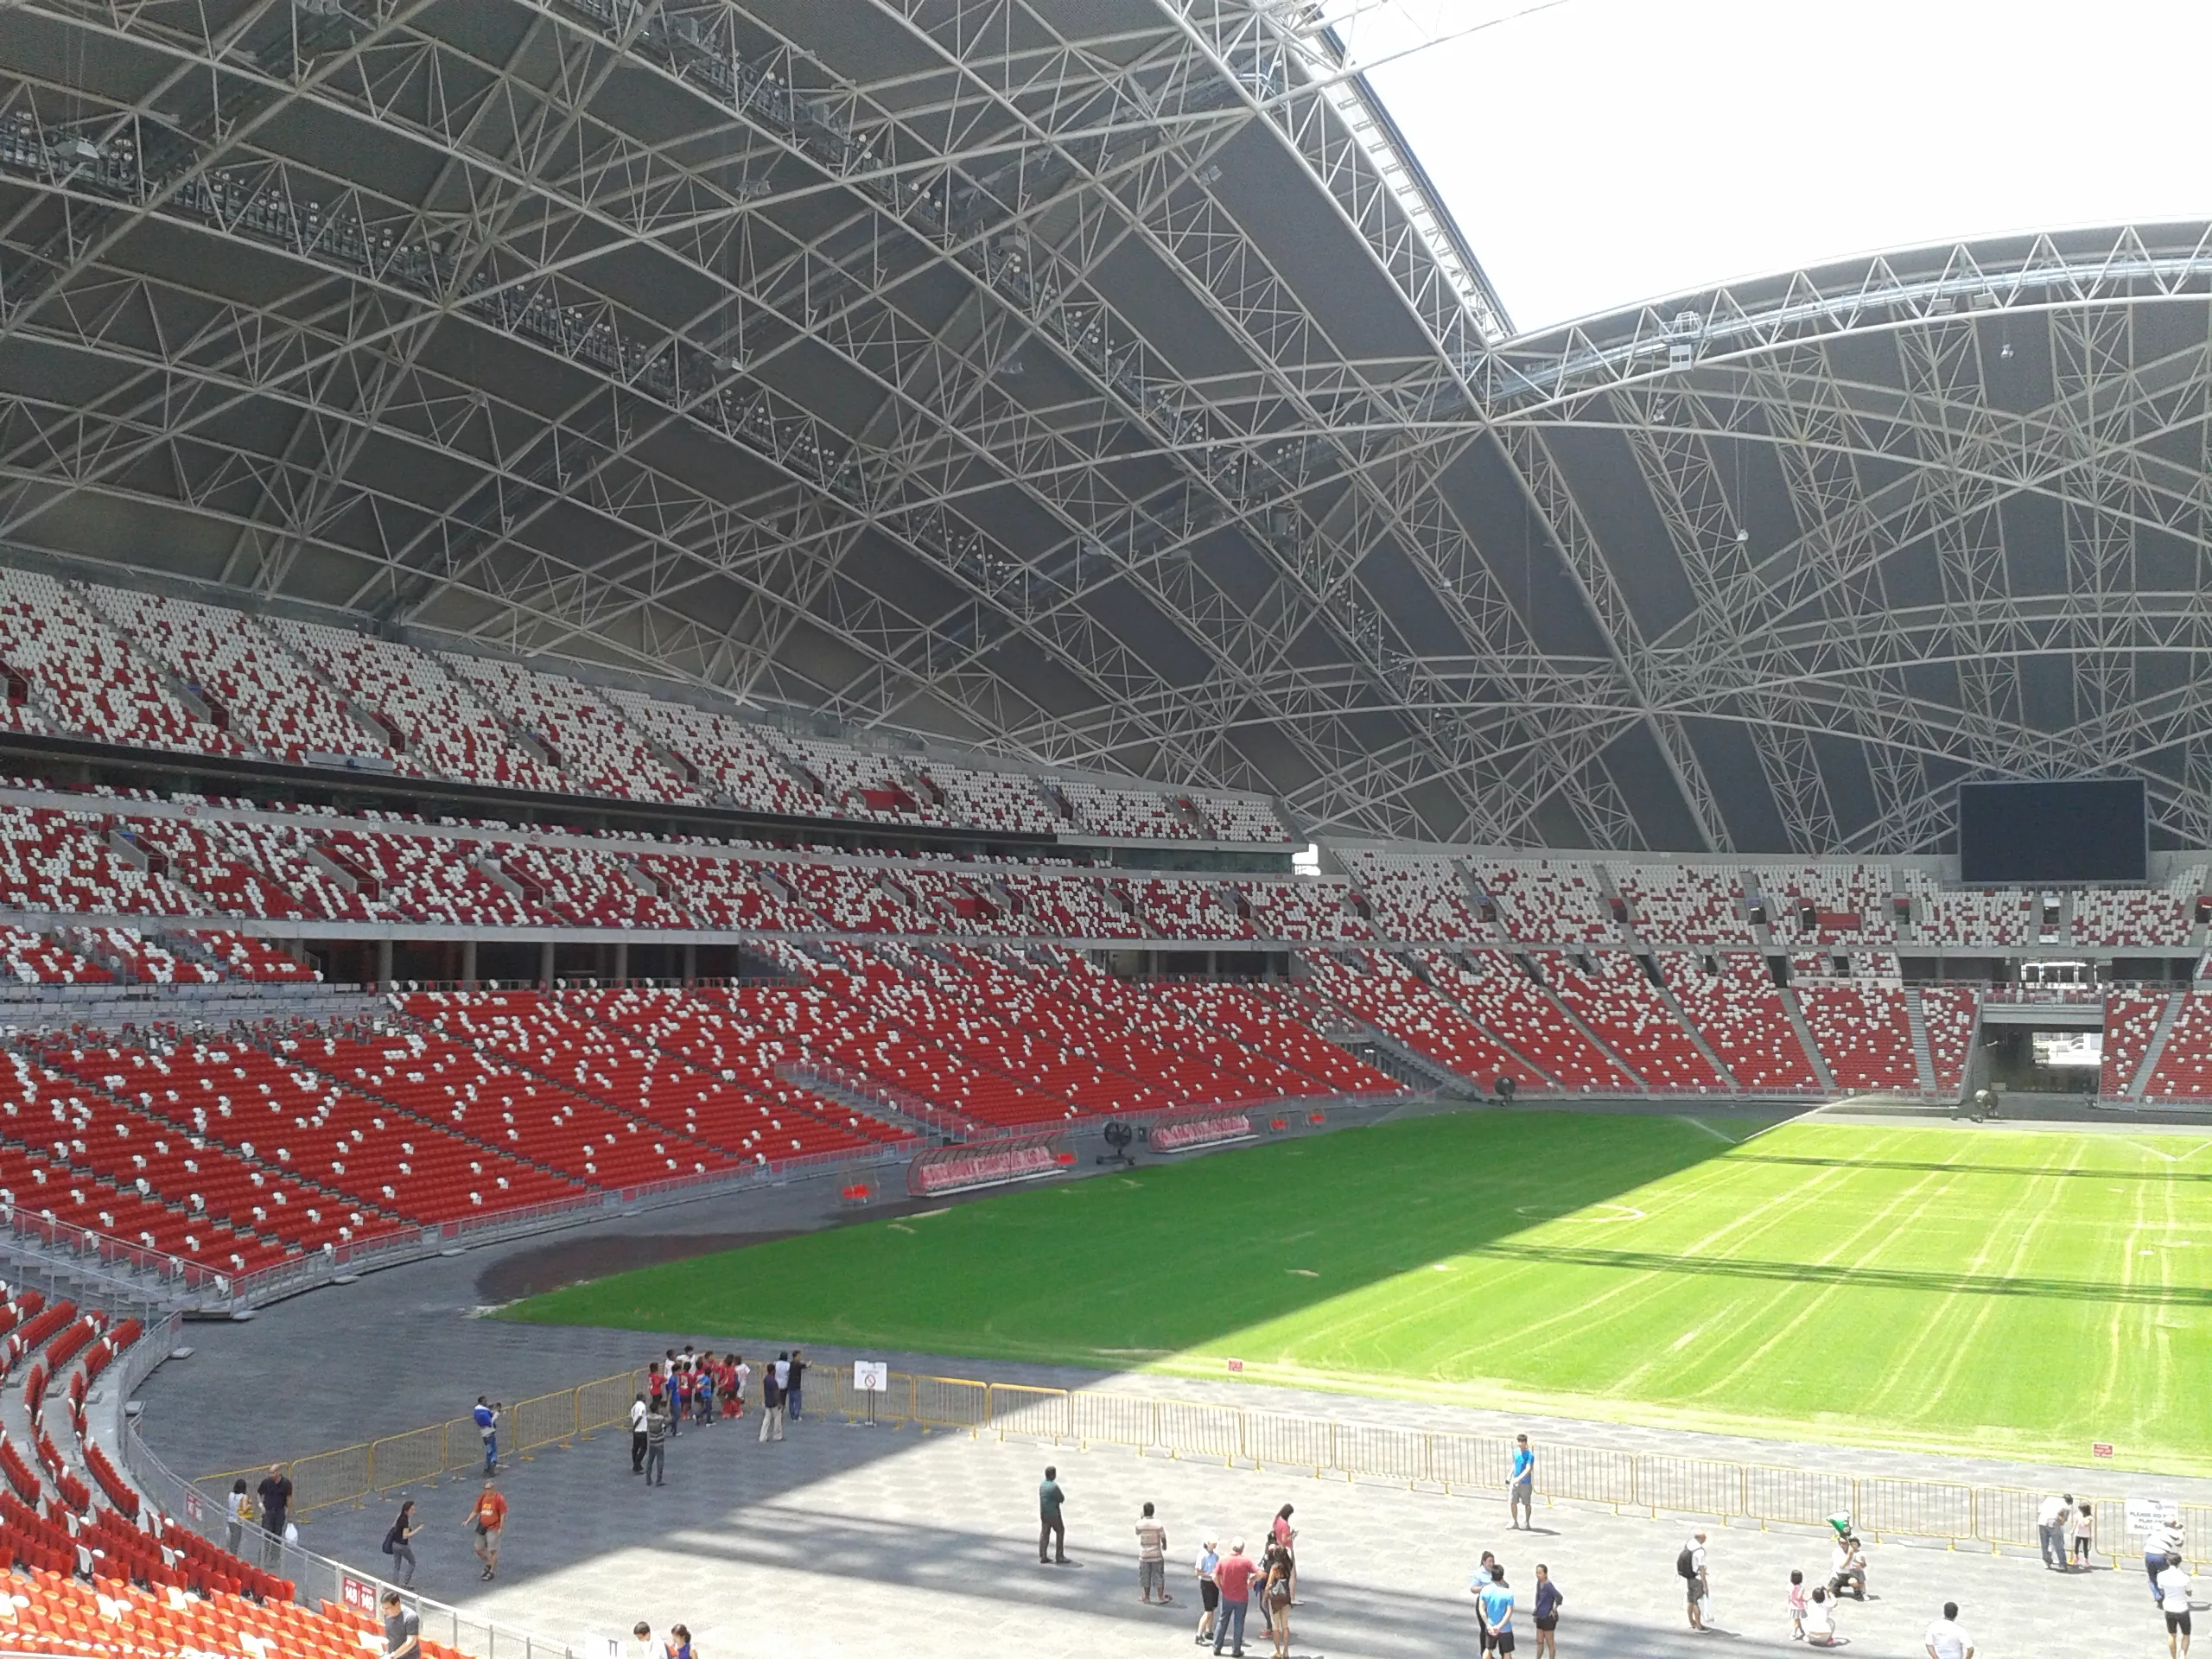 New Singapore National Stadium in Singapore, Central Asia | Football - Rated 3.8